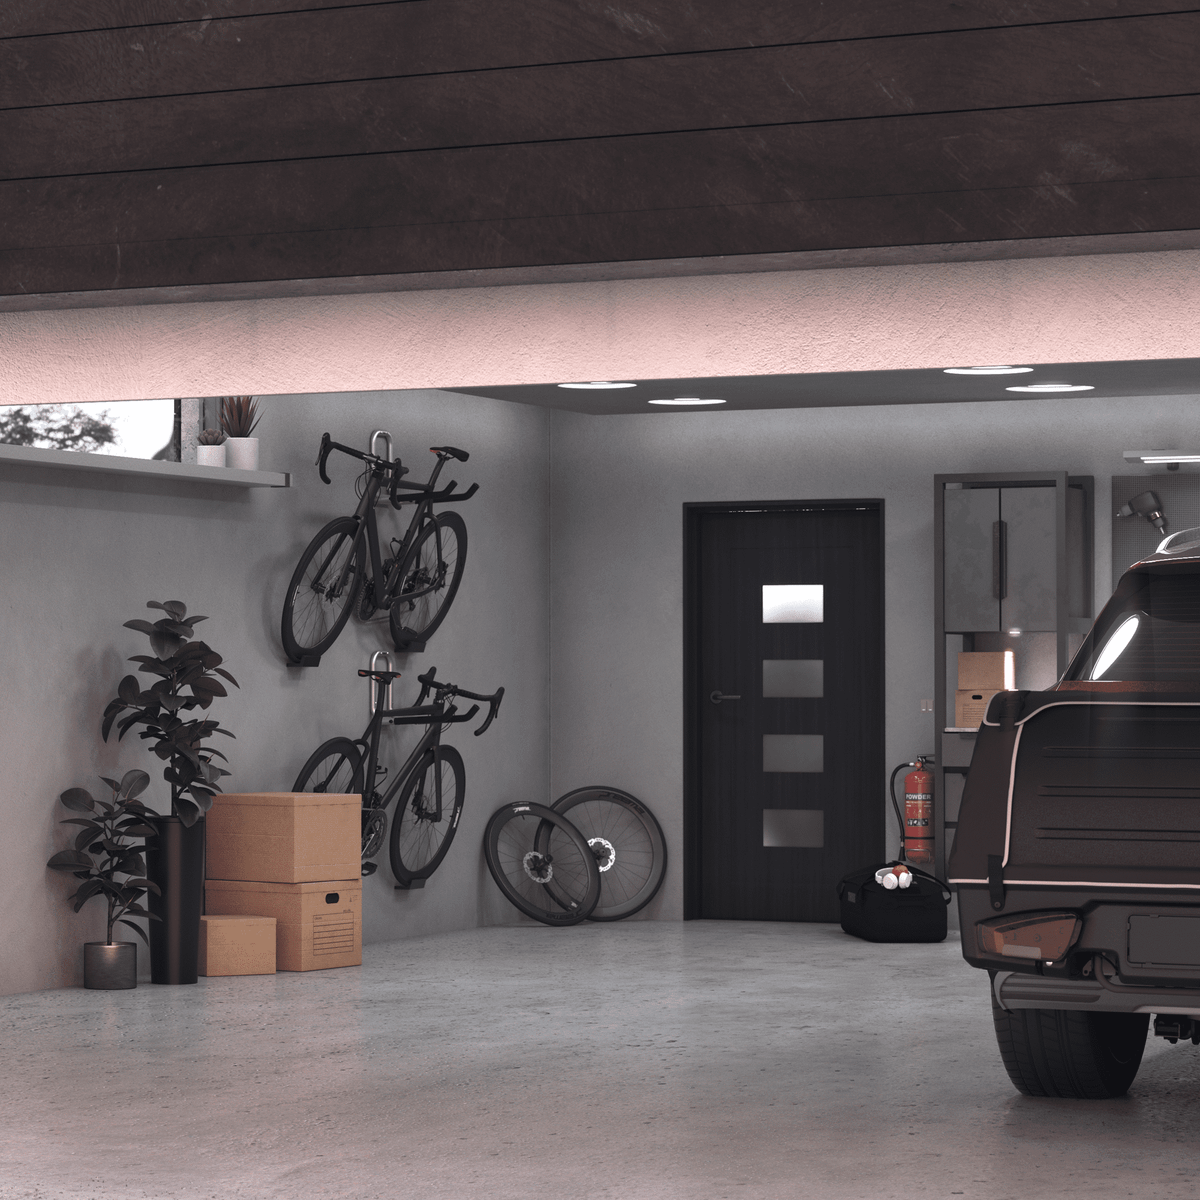 A car is parked in the garage and there are bikes hanging on the Thule Wall hanger.